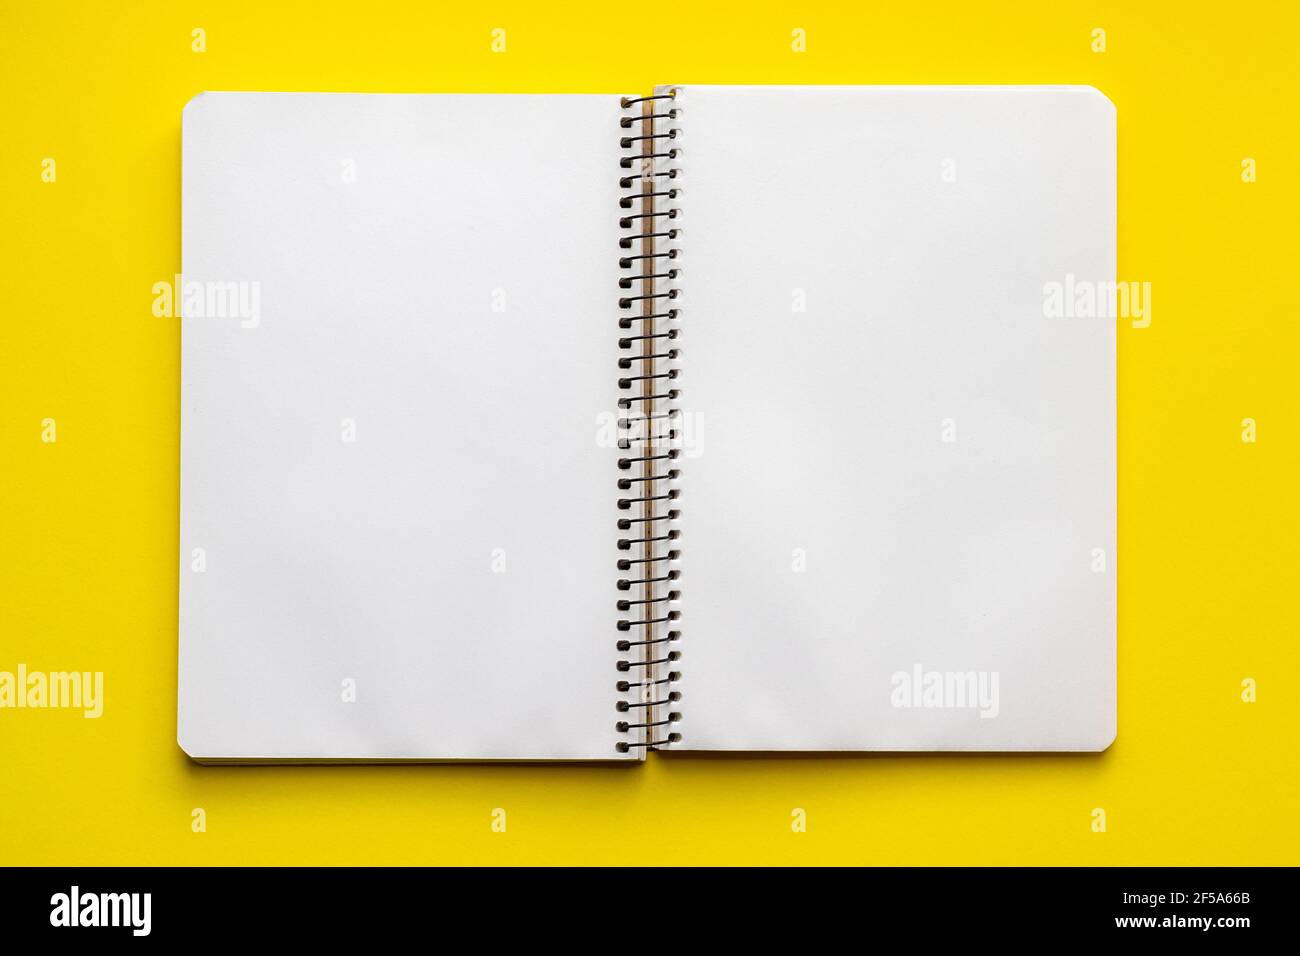 Open spiral notebook with blank empty white sheets on a bright yellow background, top view, flat lay Stock Photo